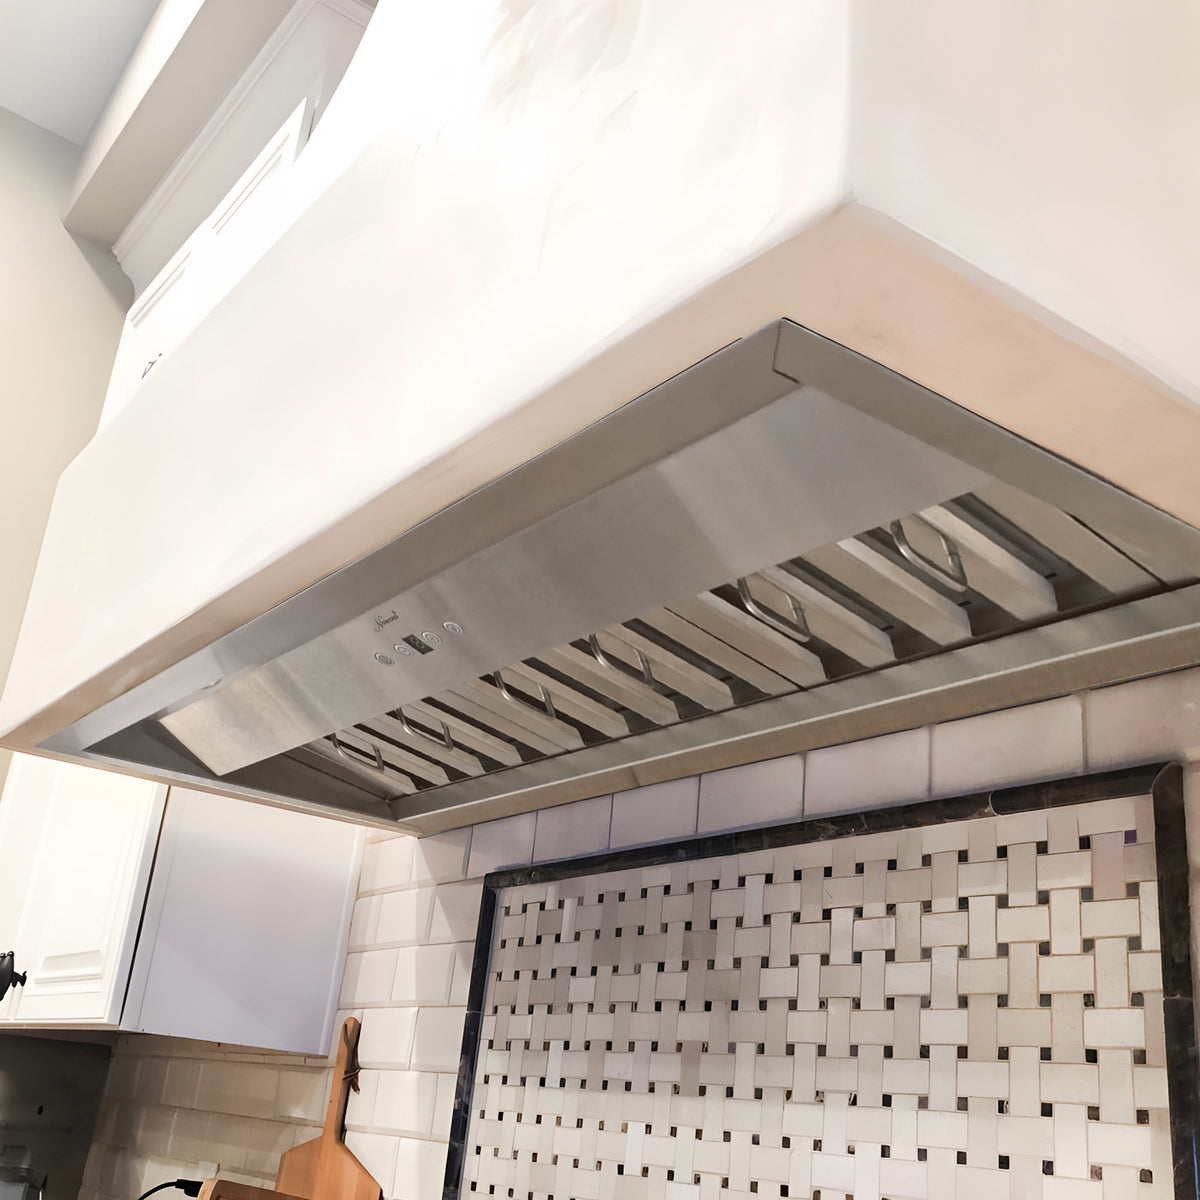 Range Hood Insert 36 Inch, Ultra Quiet, Powerful Suction Built-in Kitchen Vent Hood, Stainless Steel Ducted Stove Hood with Dimmable LED Lights Warm White, 3-Speeds 600CFM